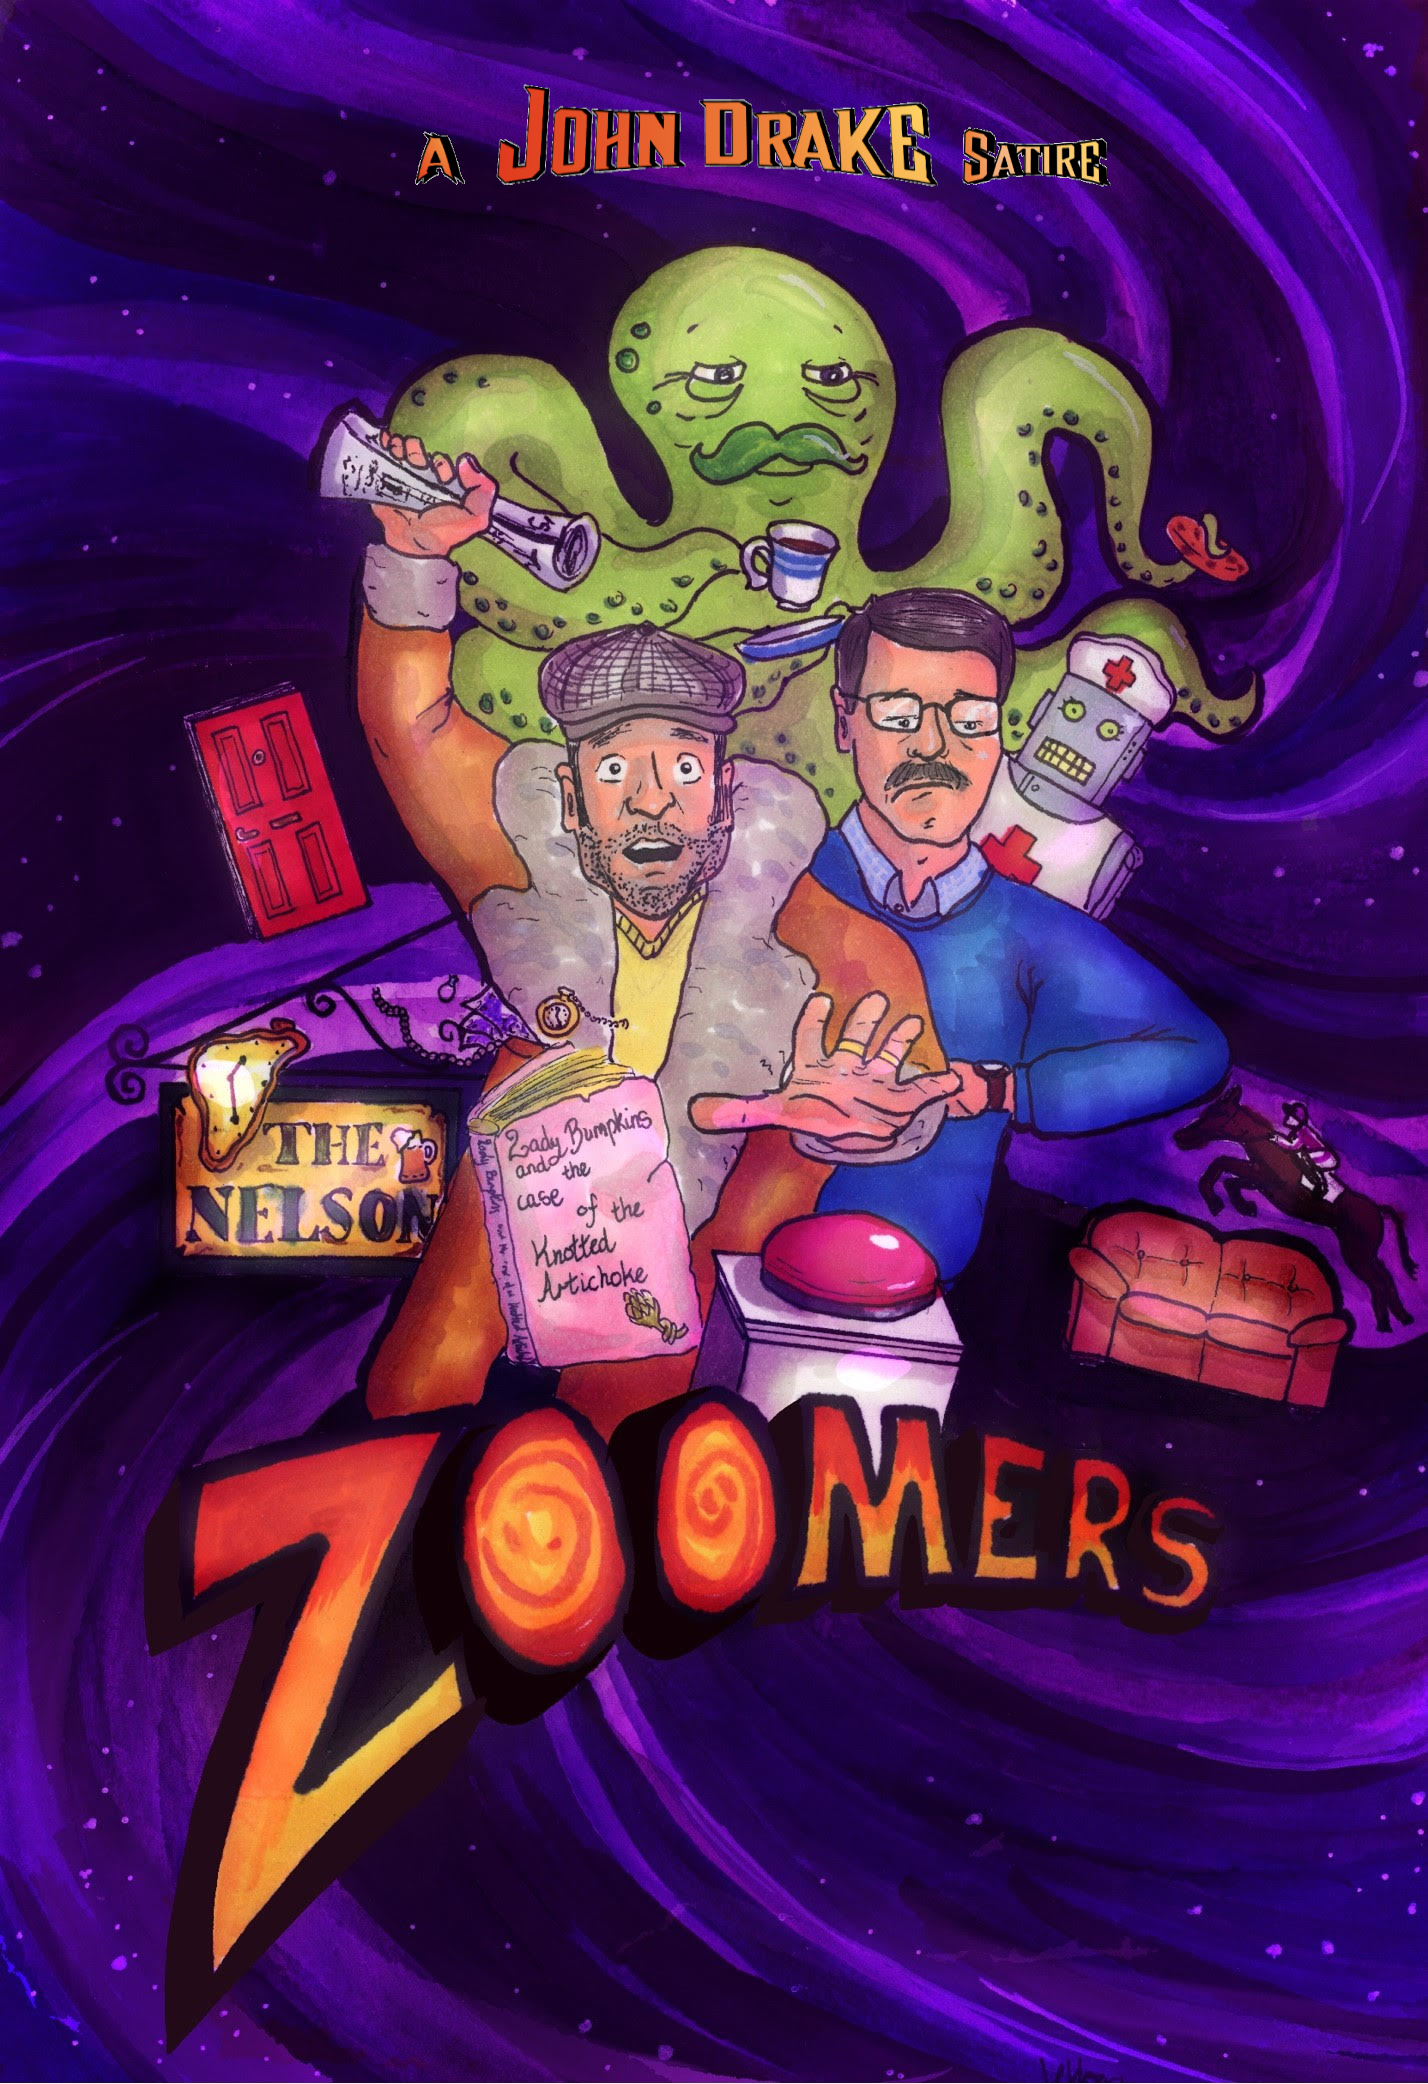 Are you a Galactic Hitchhiker at heart? Do you demand a little timey whimey mixed in with your Sci-fi comedy? Then you’re going to love Zoomers, the next comedic gem from John Drake, plus new audio, the Corsari Universe, and more.